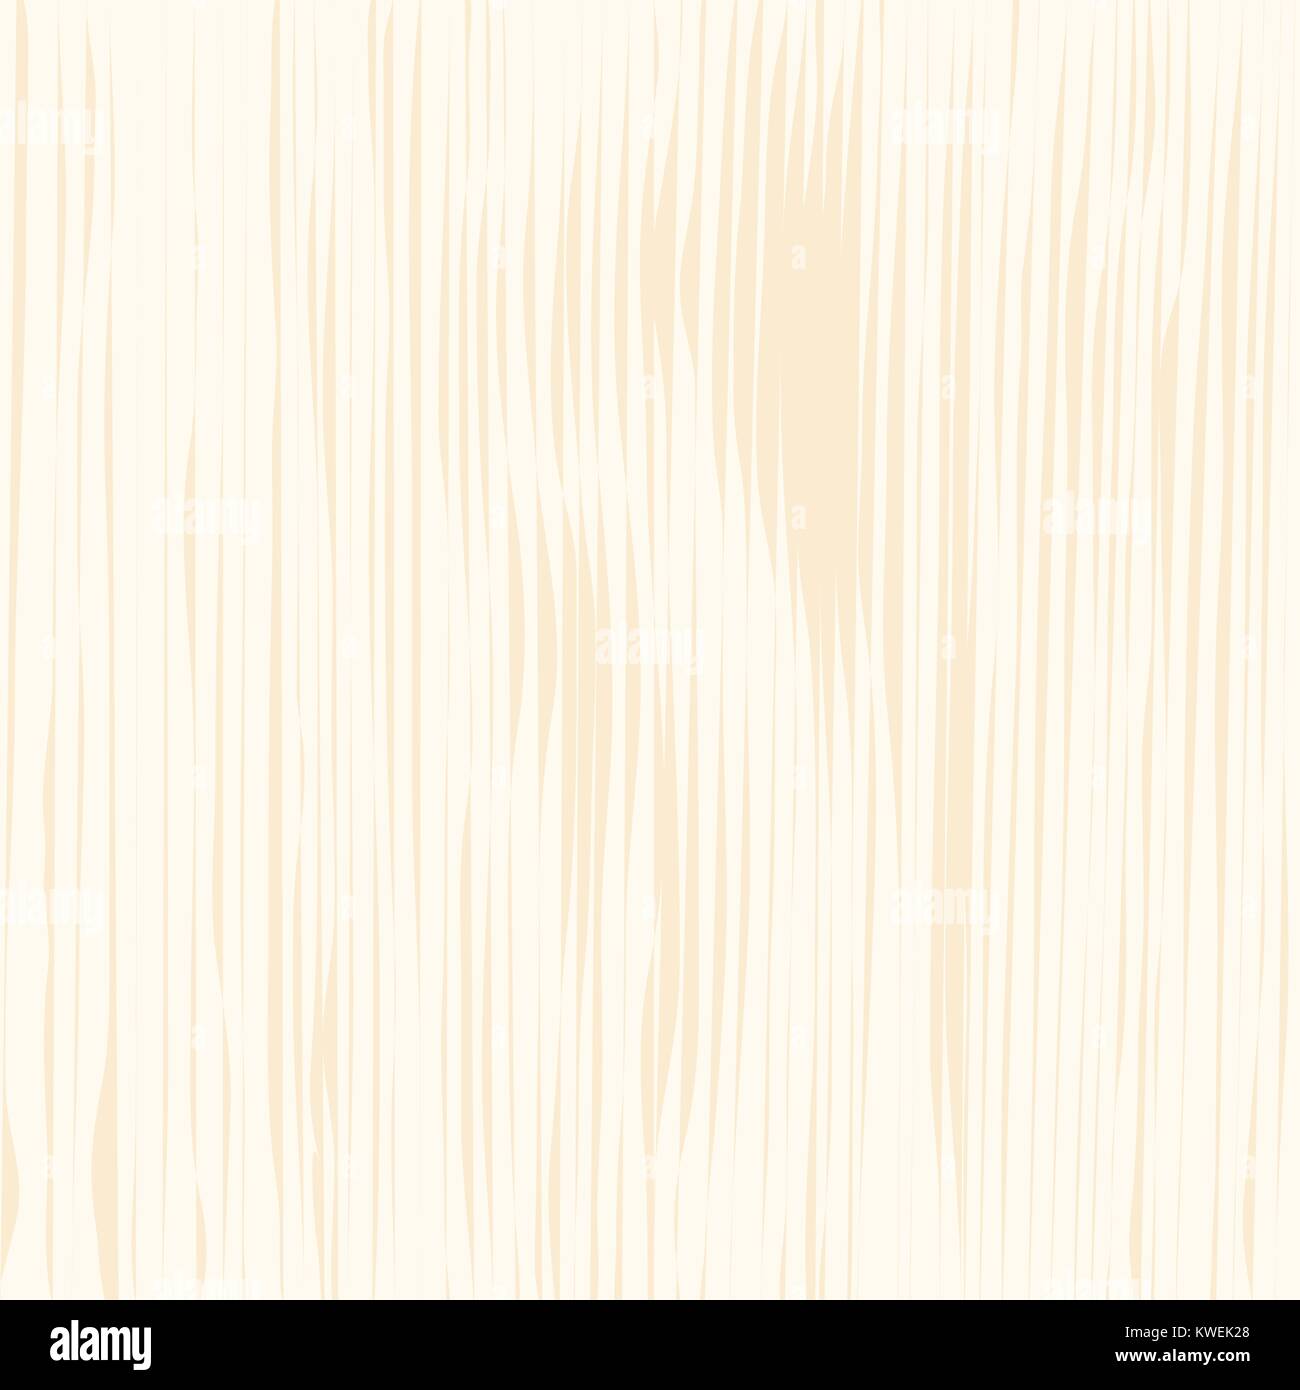 Light brown wood background pattern Perfect material for architecture design purposes. Lumber construction material. Vector illustration Stock Vector